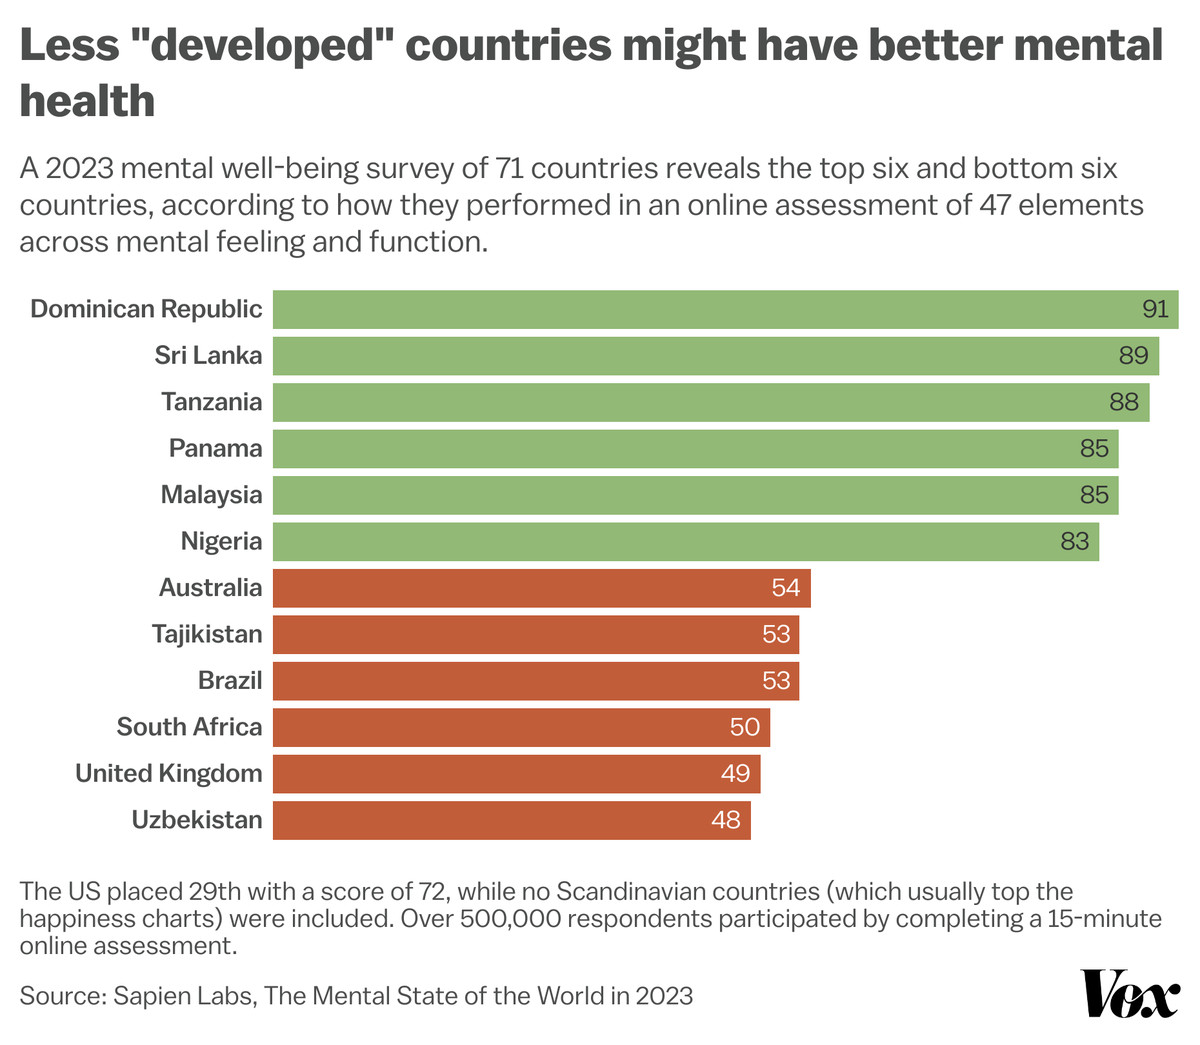 Ranking of the top six and bottom six countries from the fourth annual mental state of the world report. Countries like the Dominican Republic an Tanzania are on top, while the UK, Australia, And Uzbekistan are at the bottom.